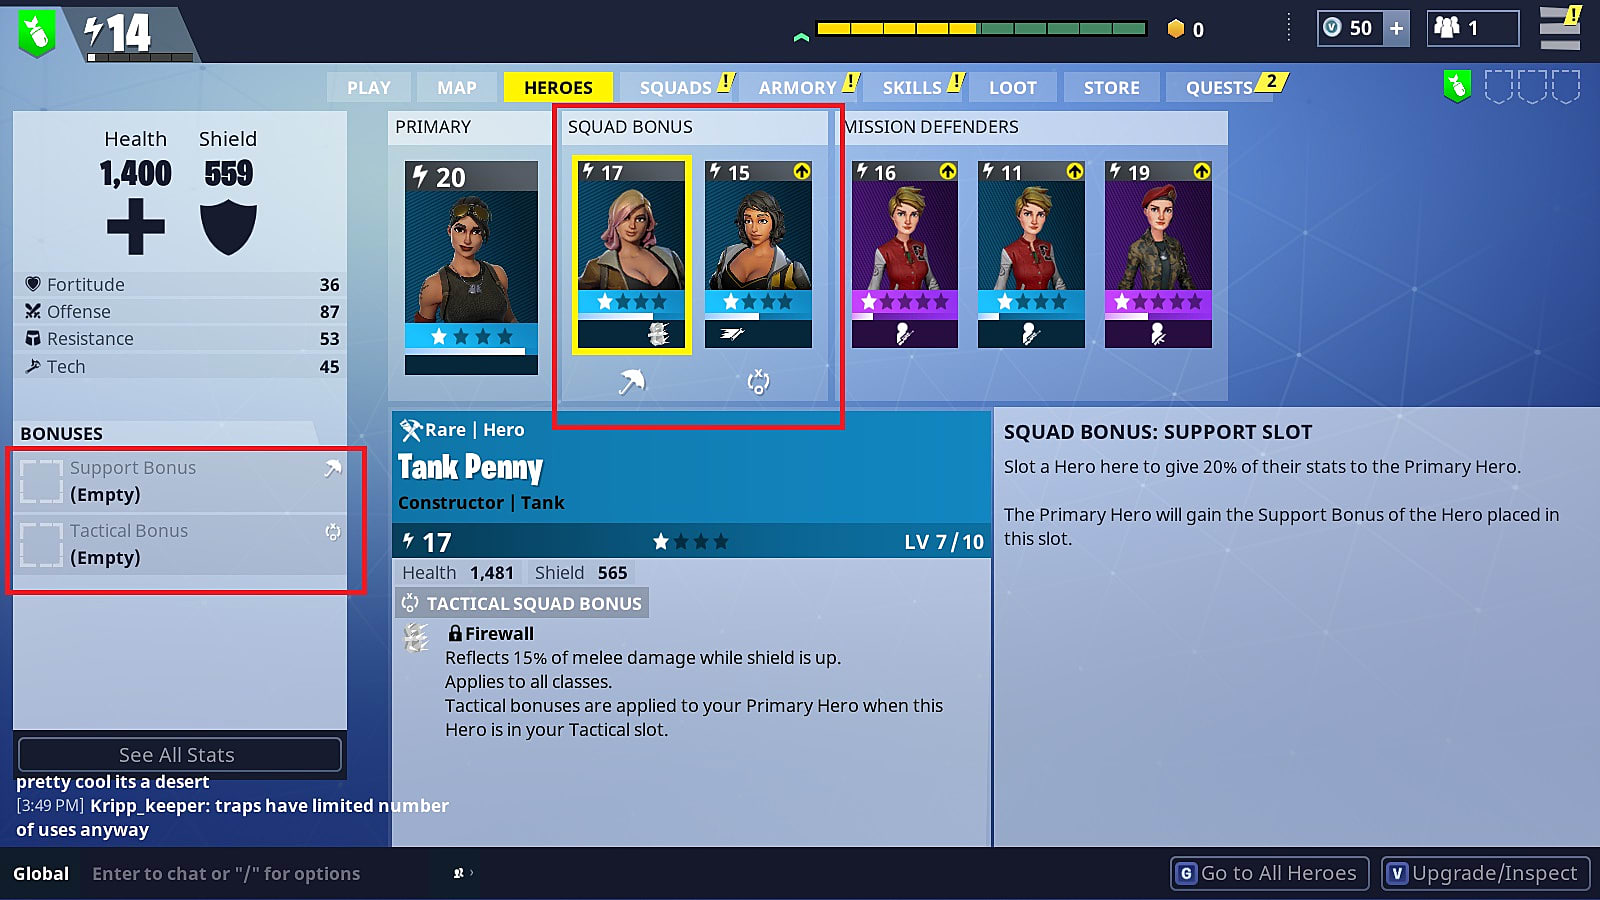 hero squads and bonuses - why are fortnite stats down